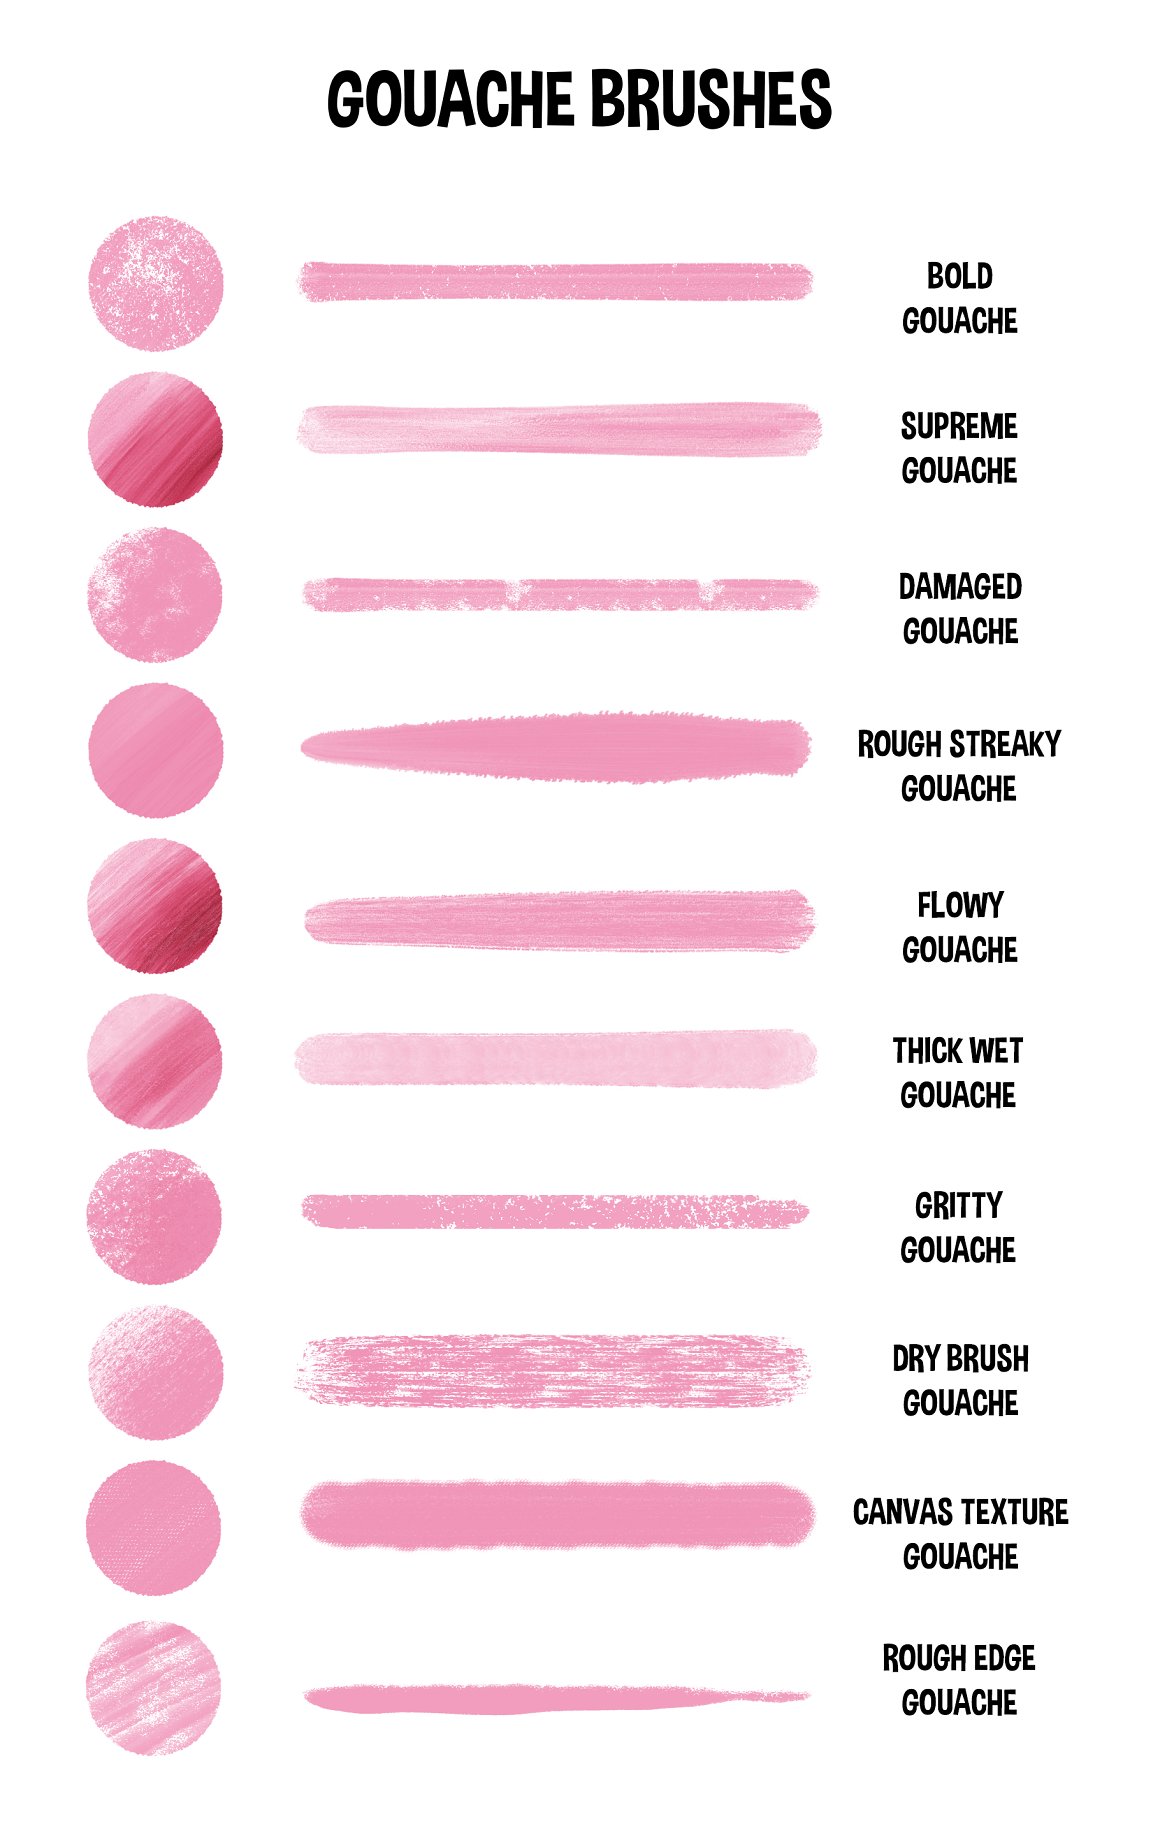 10 pink various gouache brushes on a white background.